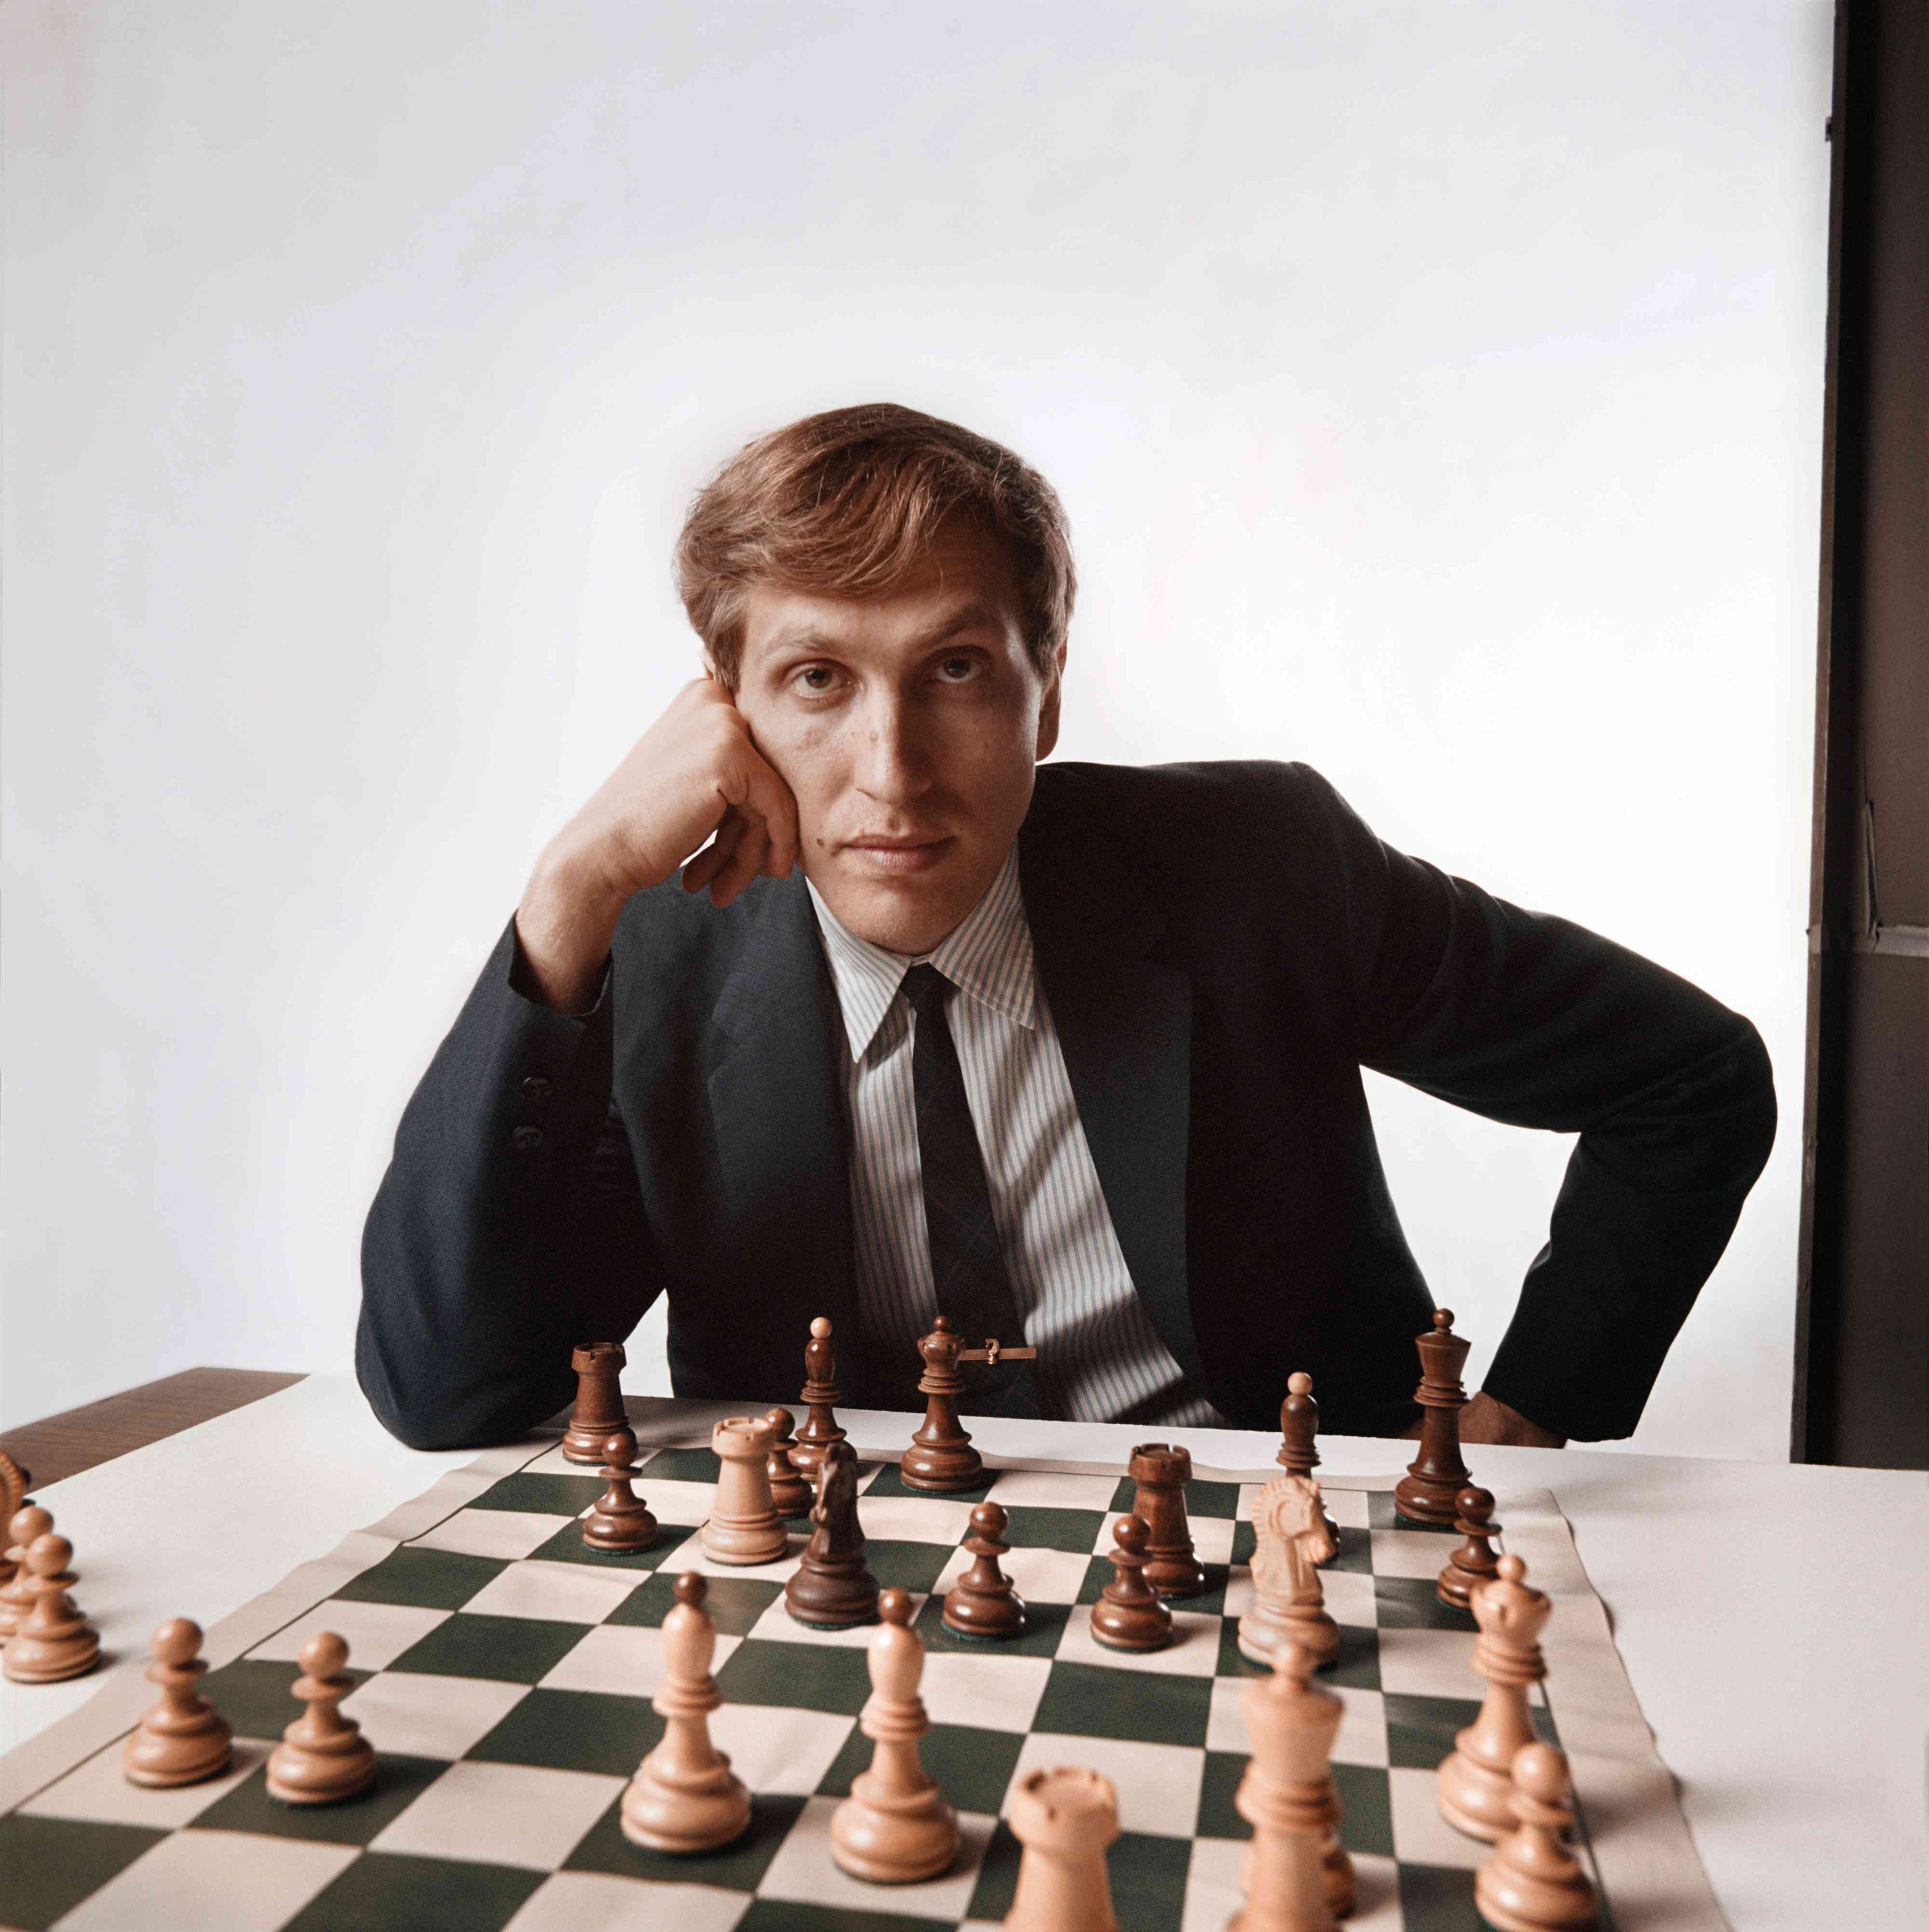 Inspiring Chess Quotes From the Masters